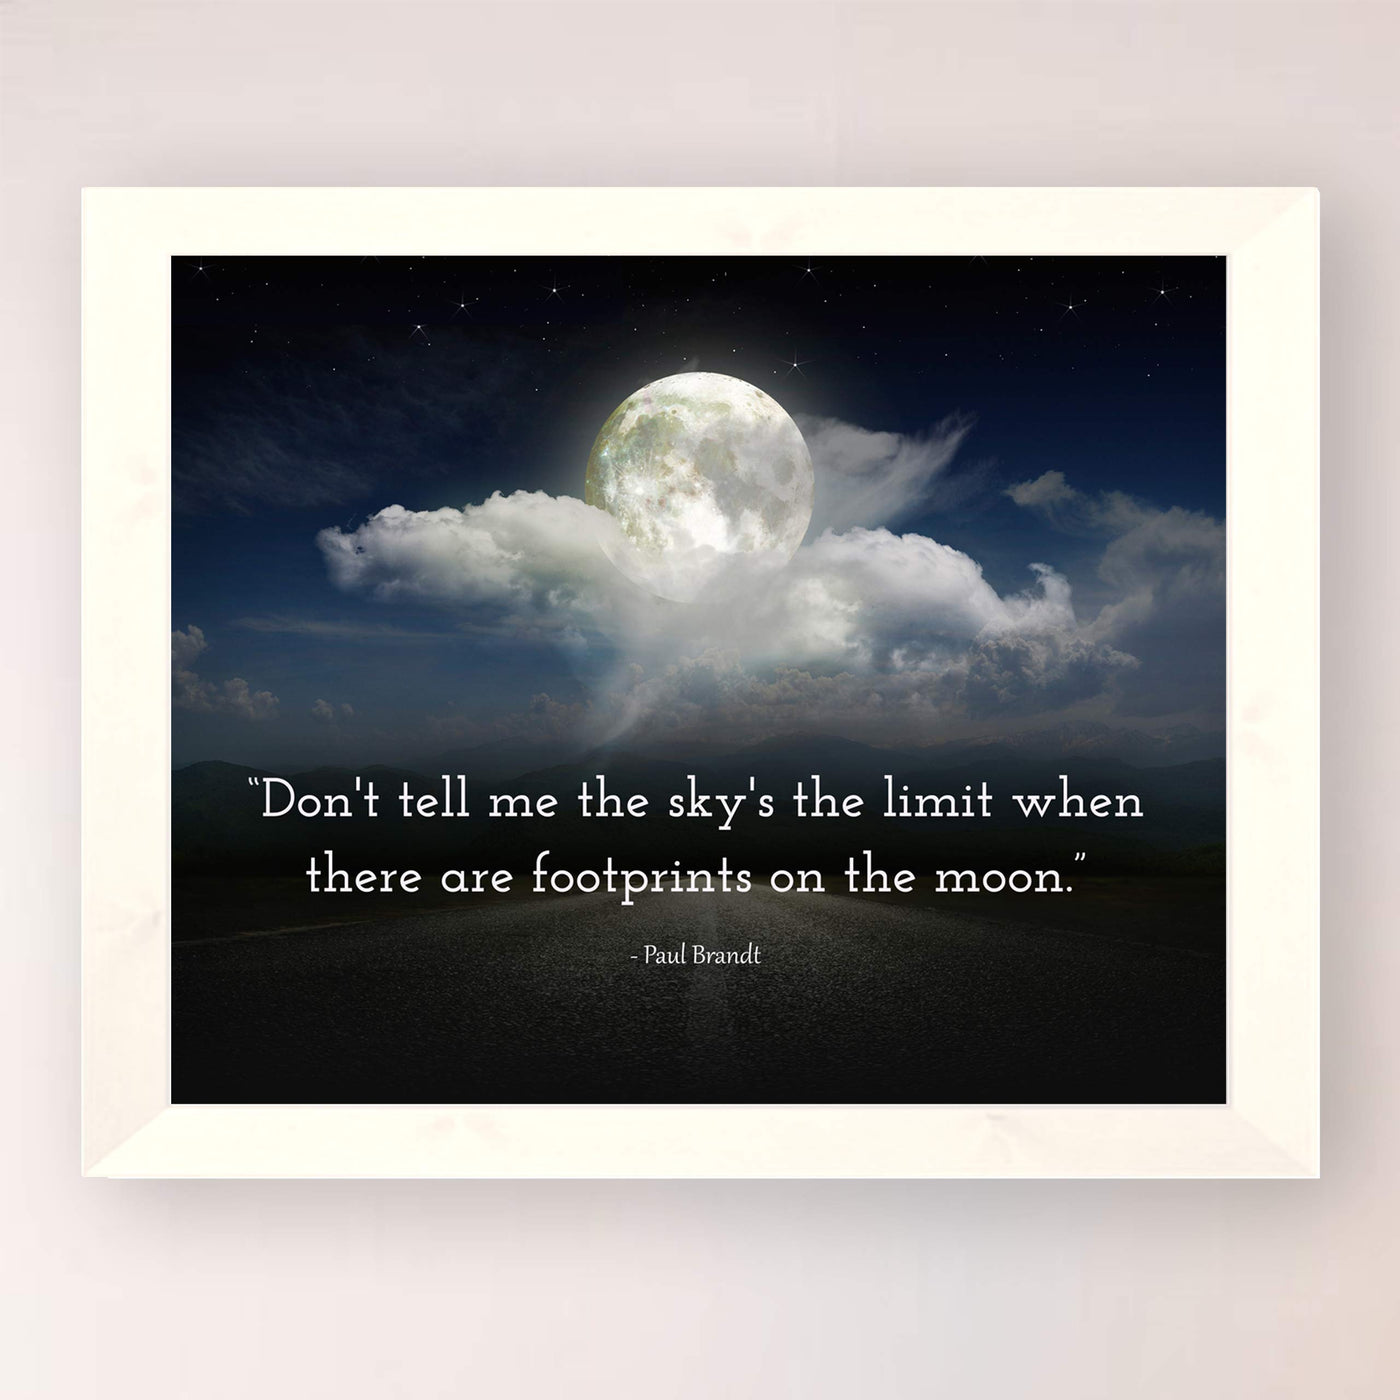 Paul Brandt-"Don't Tell Me the Sky's the Limit-Footprints on the Moon"-Song Lyrics Wall Art-10 x 8" Country Music Poster Print-Ready to Frame. Perfect Home-Office-Studio-Bar-Cave Decor. Great Gift!